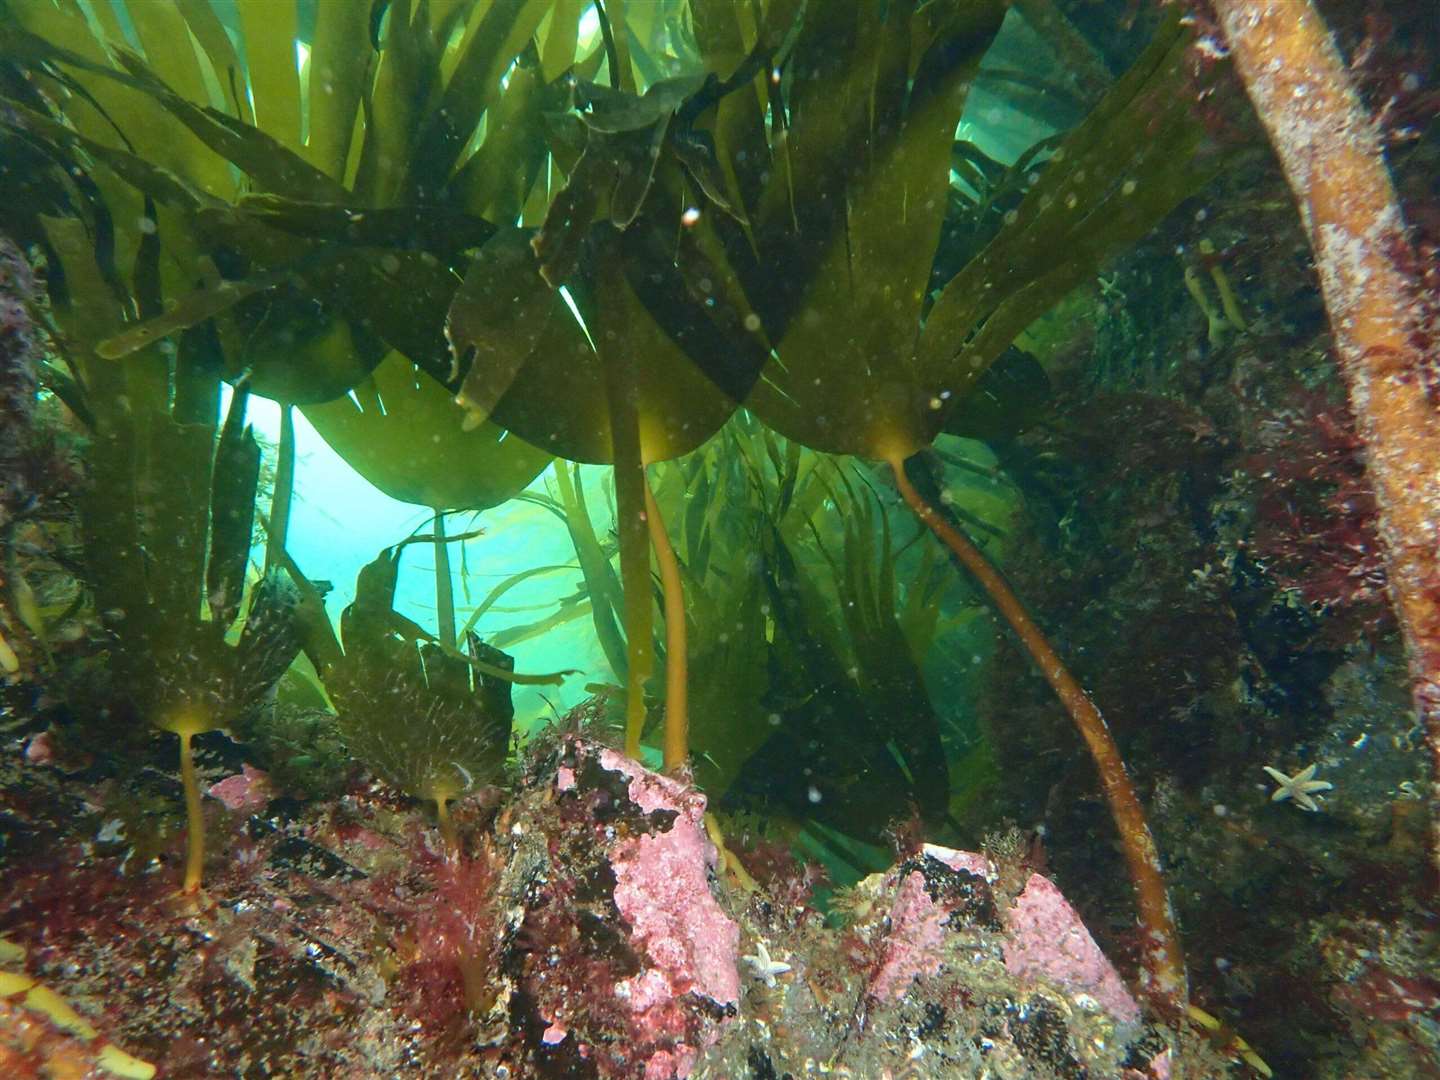 Kelp will be the focus of the discussion